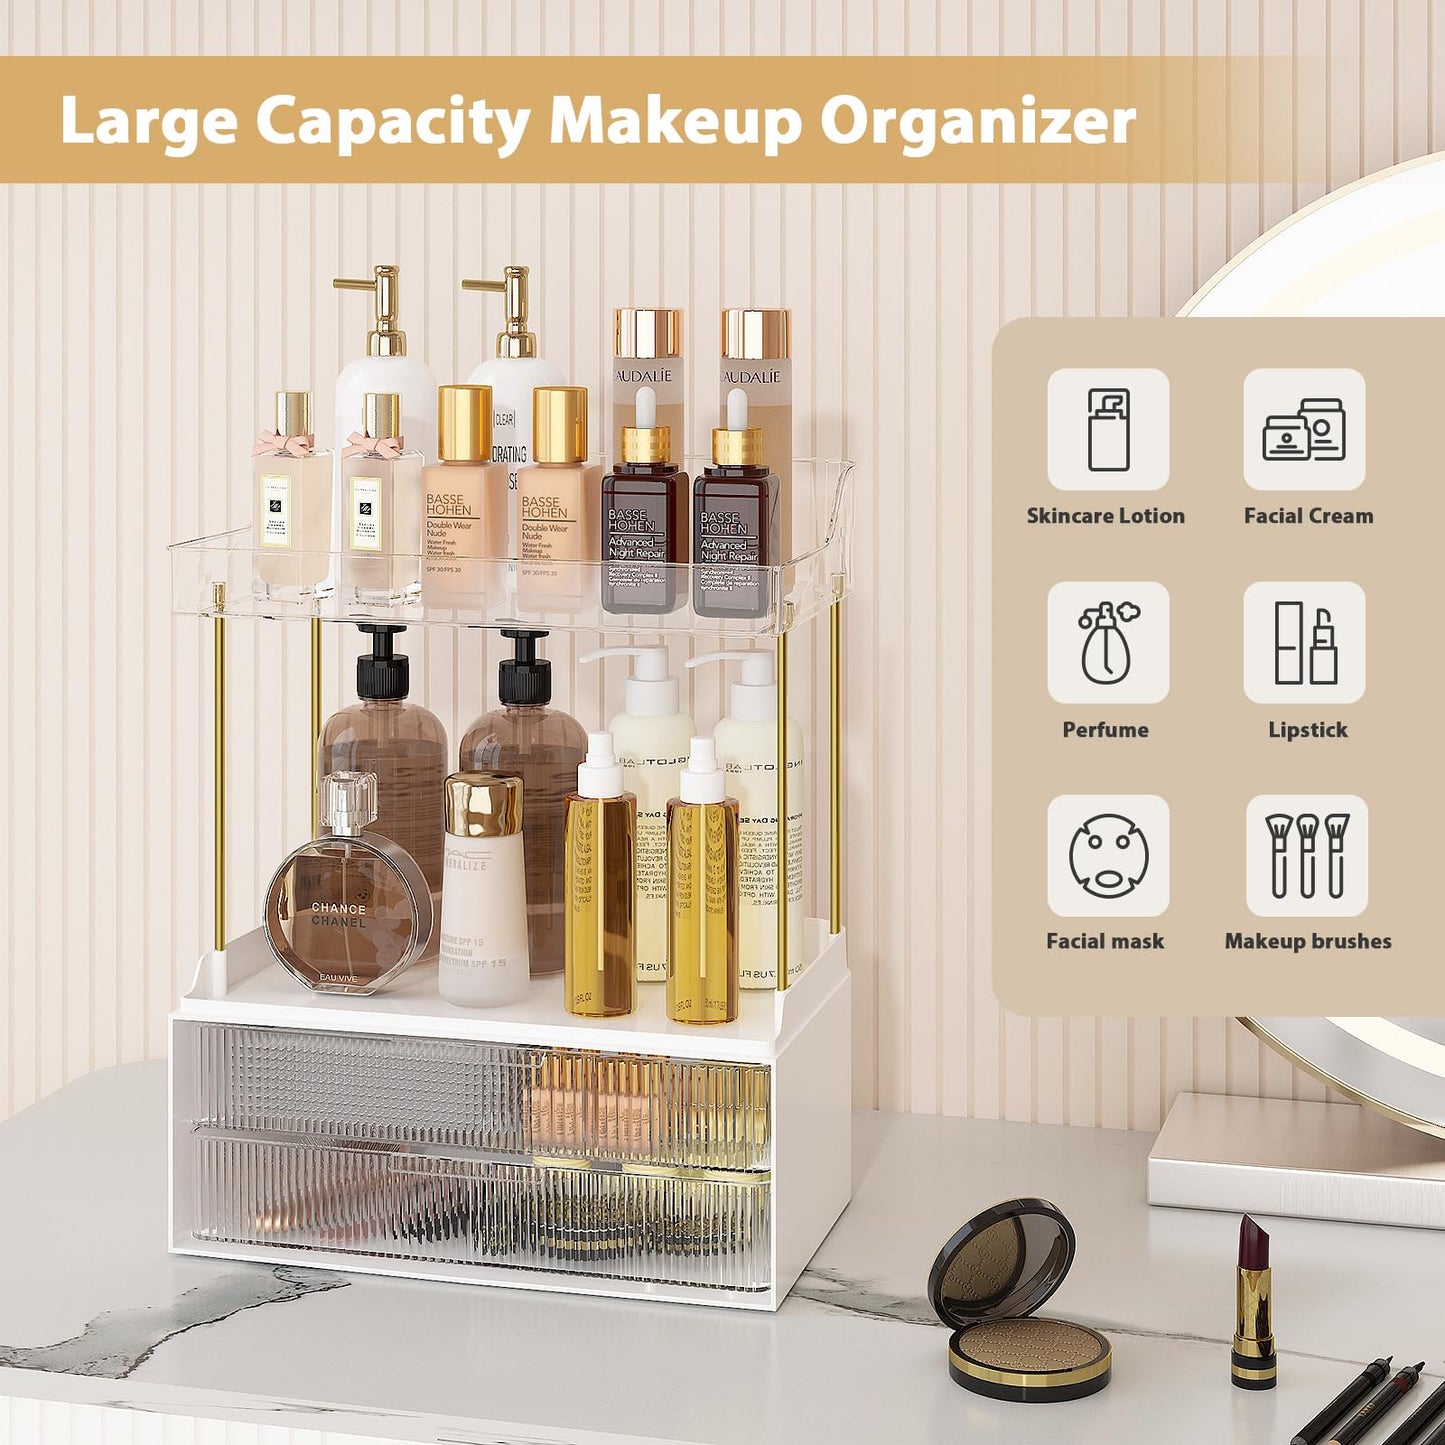 Webetop Bathroom Organizers and Storage Countertop, Large Skincare Counter Organizer with 2 Drawers, Makeup Organizer for Vanity Storage, Cosmetics, Perfume, Toiletry (Clear)